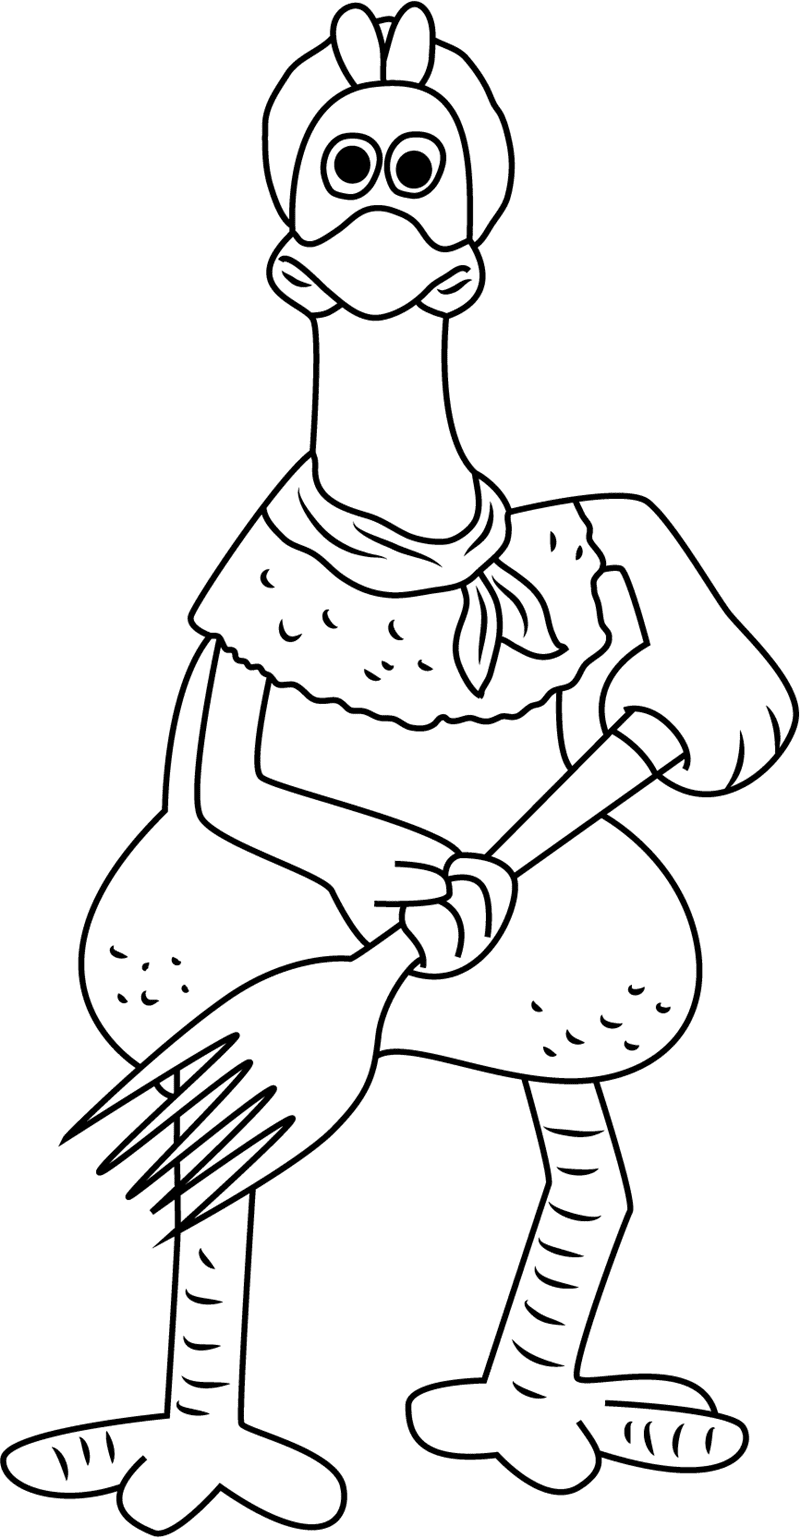 Ginger Holding Fork Coloring Page